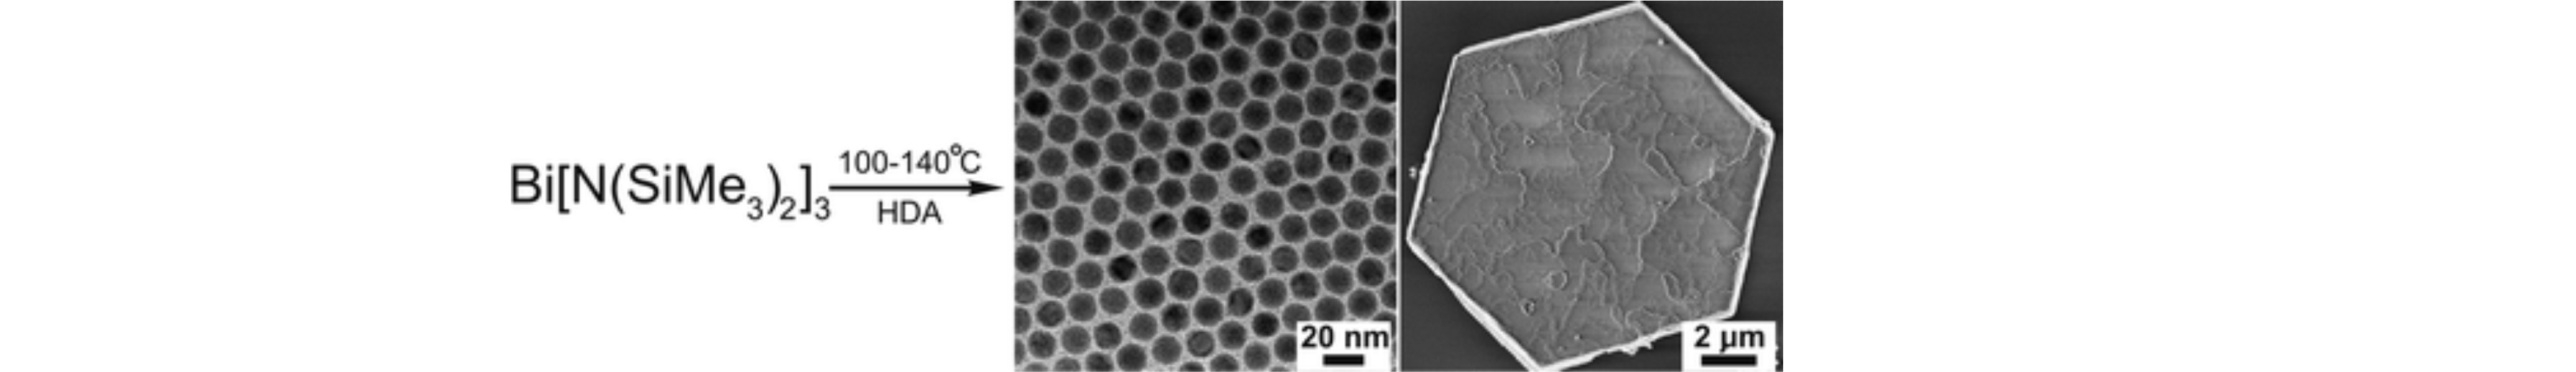 Highly Monodisperse Bismuth Nanoparticles and Their 3-Dimensional Superlattices